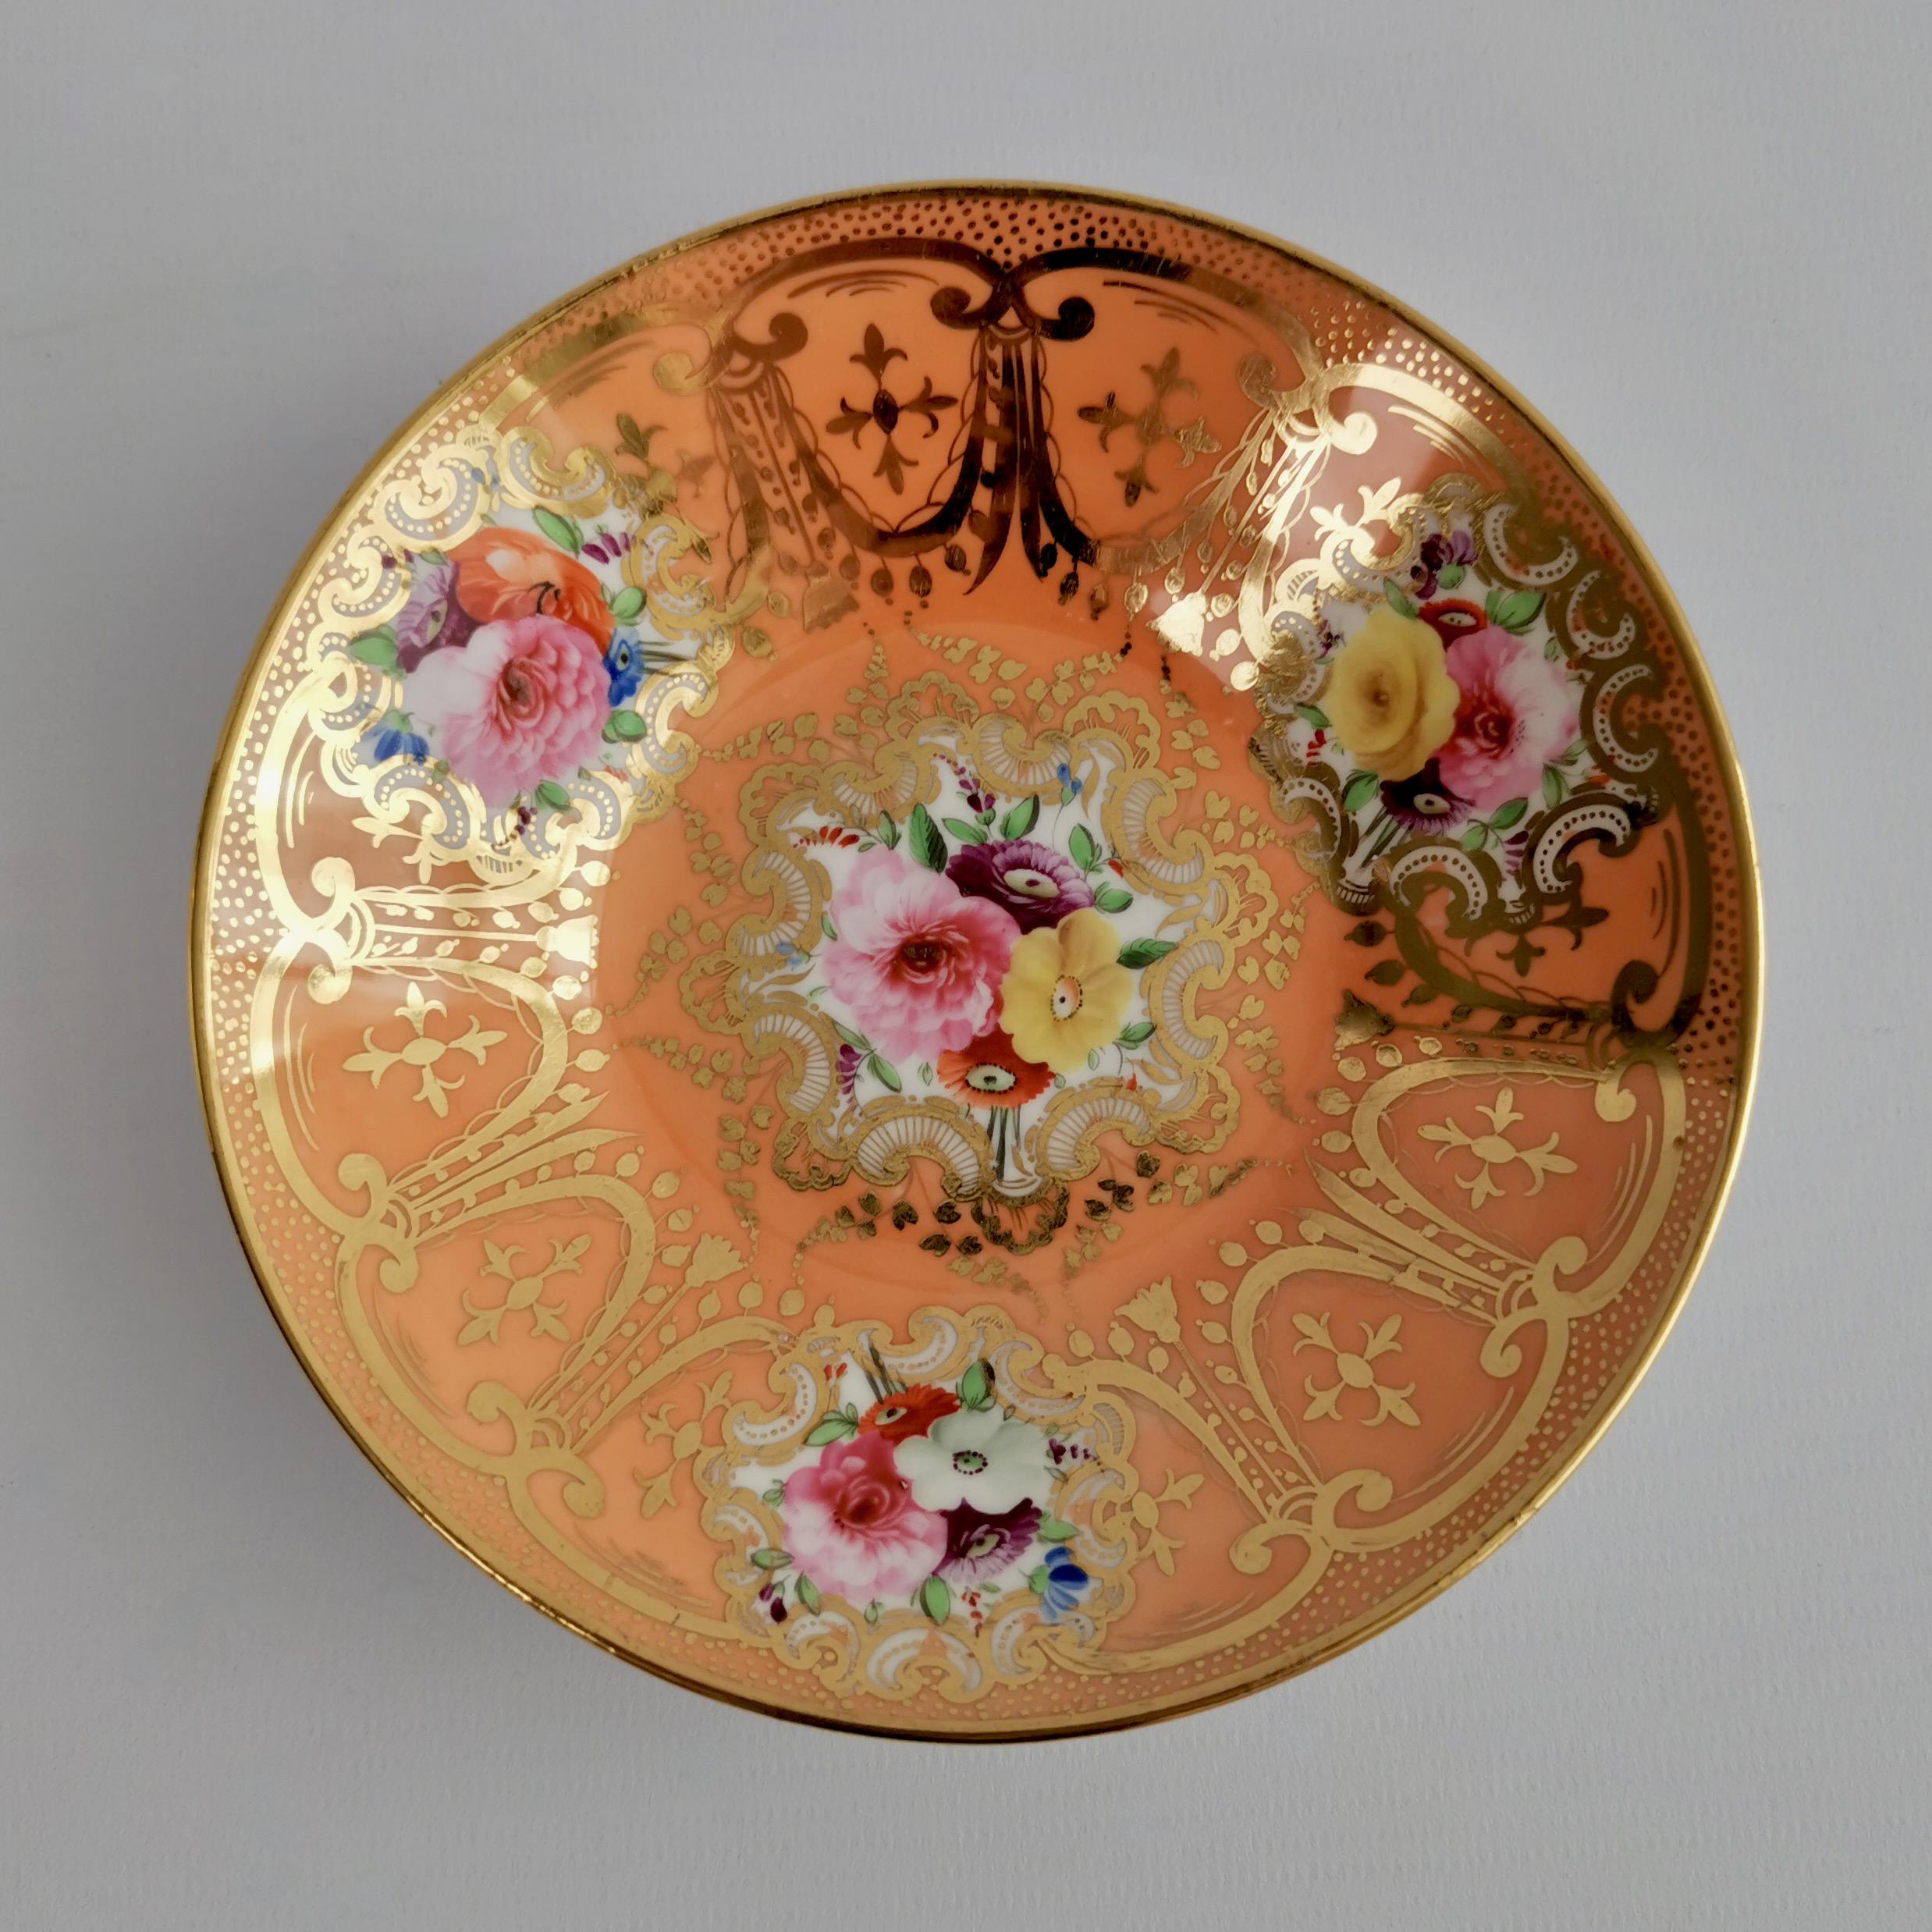 Hand-Painted Coalport Porcelain Coffee Cup, Orange with Gilt and Flowers, Regency, ca 1815